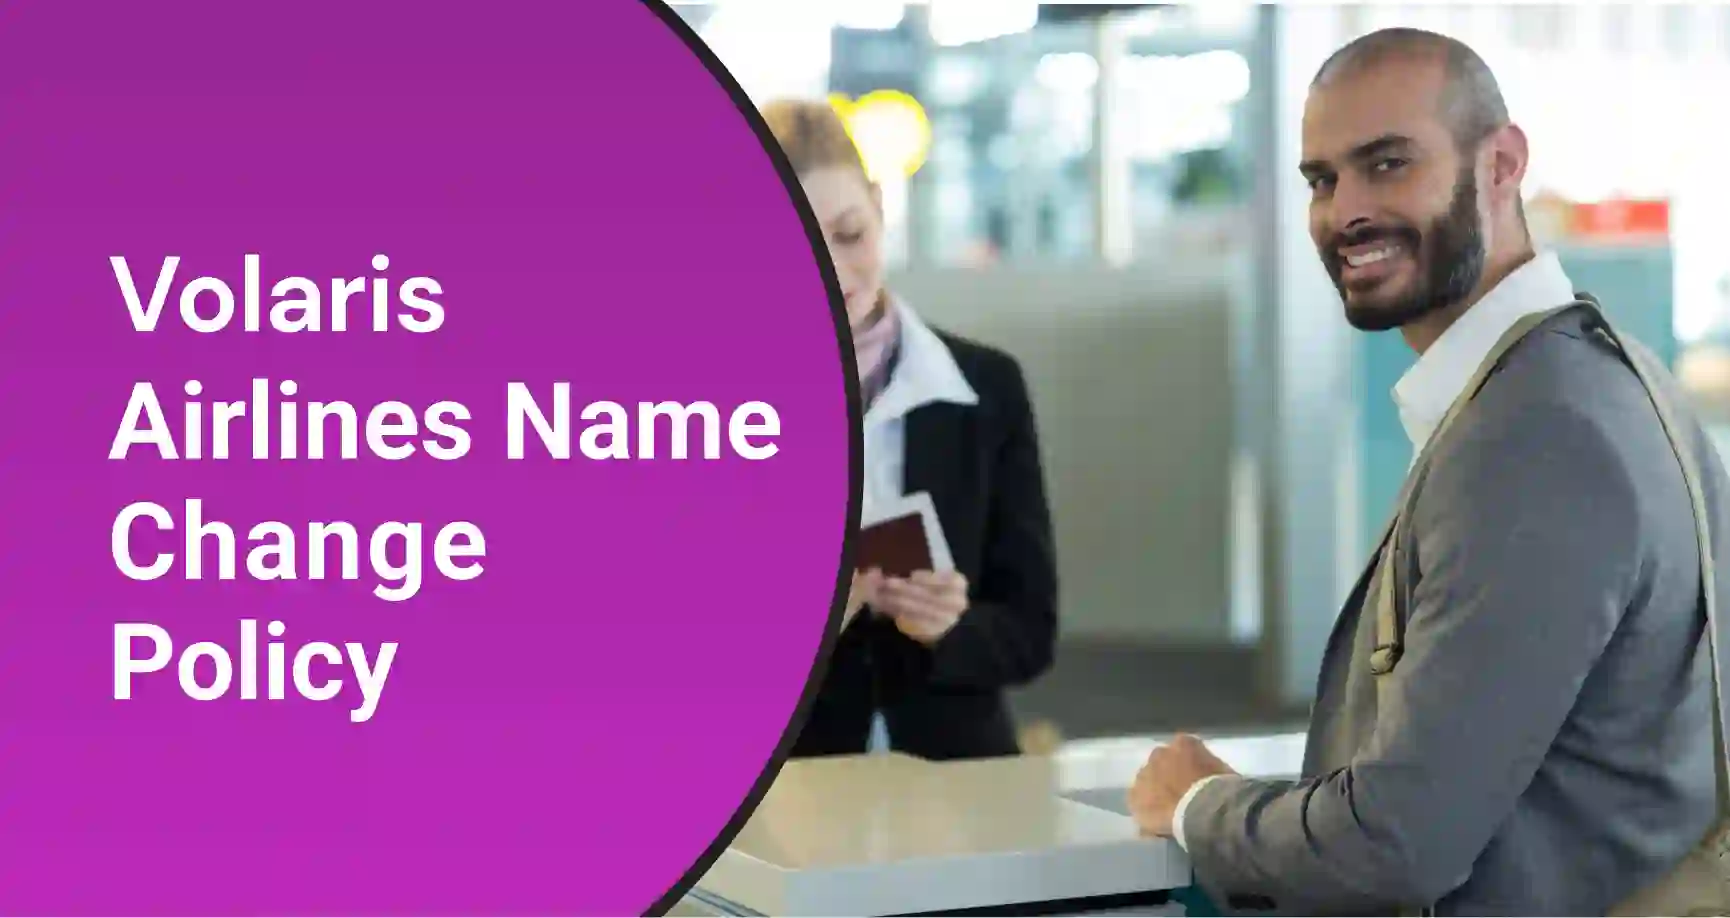 Volaris Airlines Name Change Policy